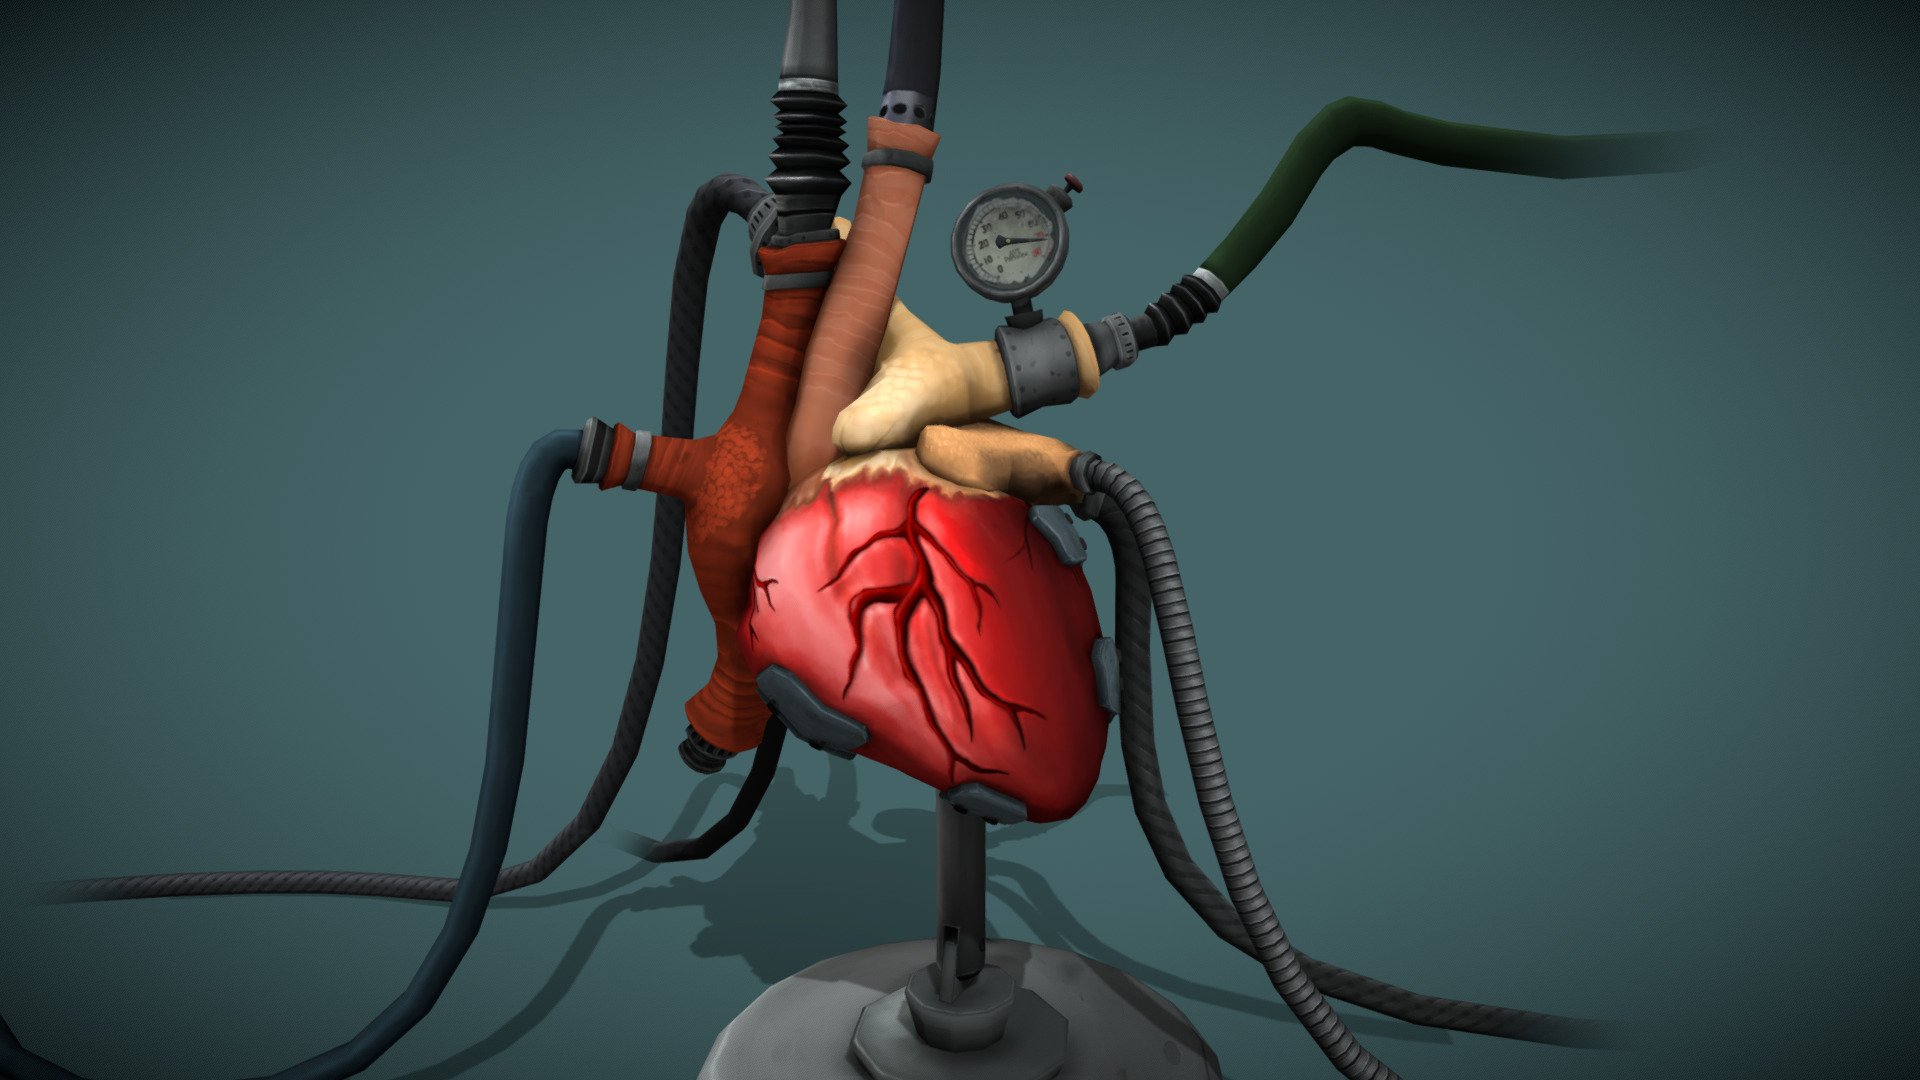 In this week's #SketchfabWeeklyChallenge, i decided to model an anatomical heart. 
The idea was to sculpt a syntehtic  human heart connected to a lot of hoses. 
I was very motivated to model the whole project, but texturing the heart  was very difficult for me this time. 
What do you like about the art style and how could i improve?

Feel free to leave a review :) - Synthetic Heart #SketchfabWeeklyChallenge Week 3 - 3D model by Youssef Jammoul (@Youssefjammoul) 3d model